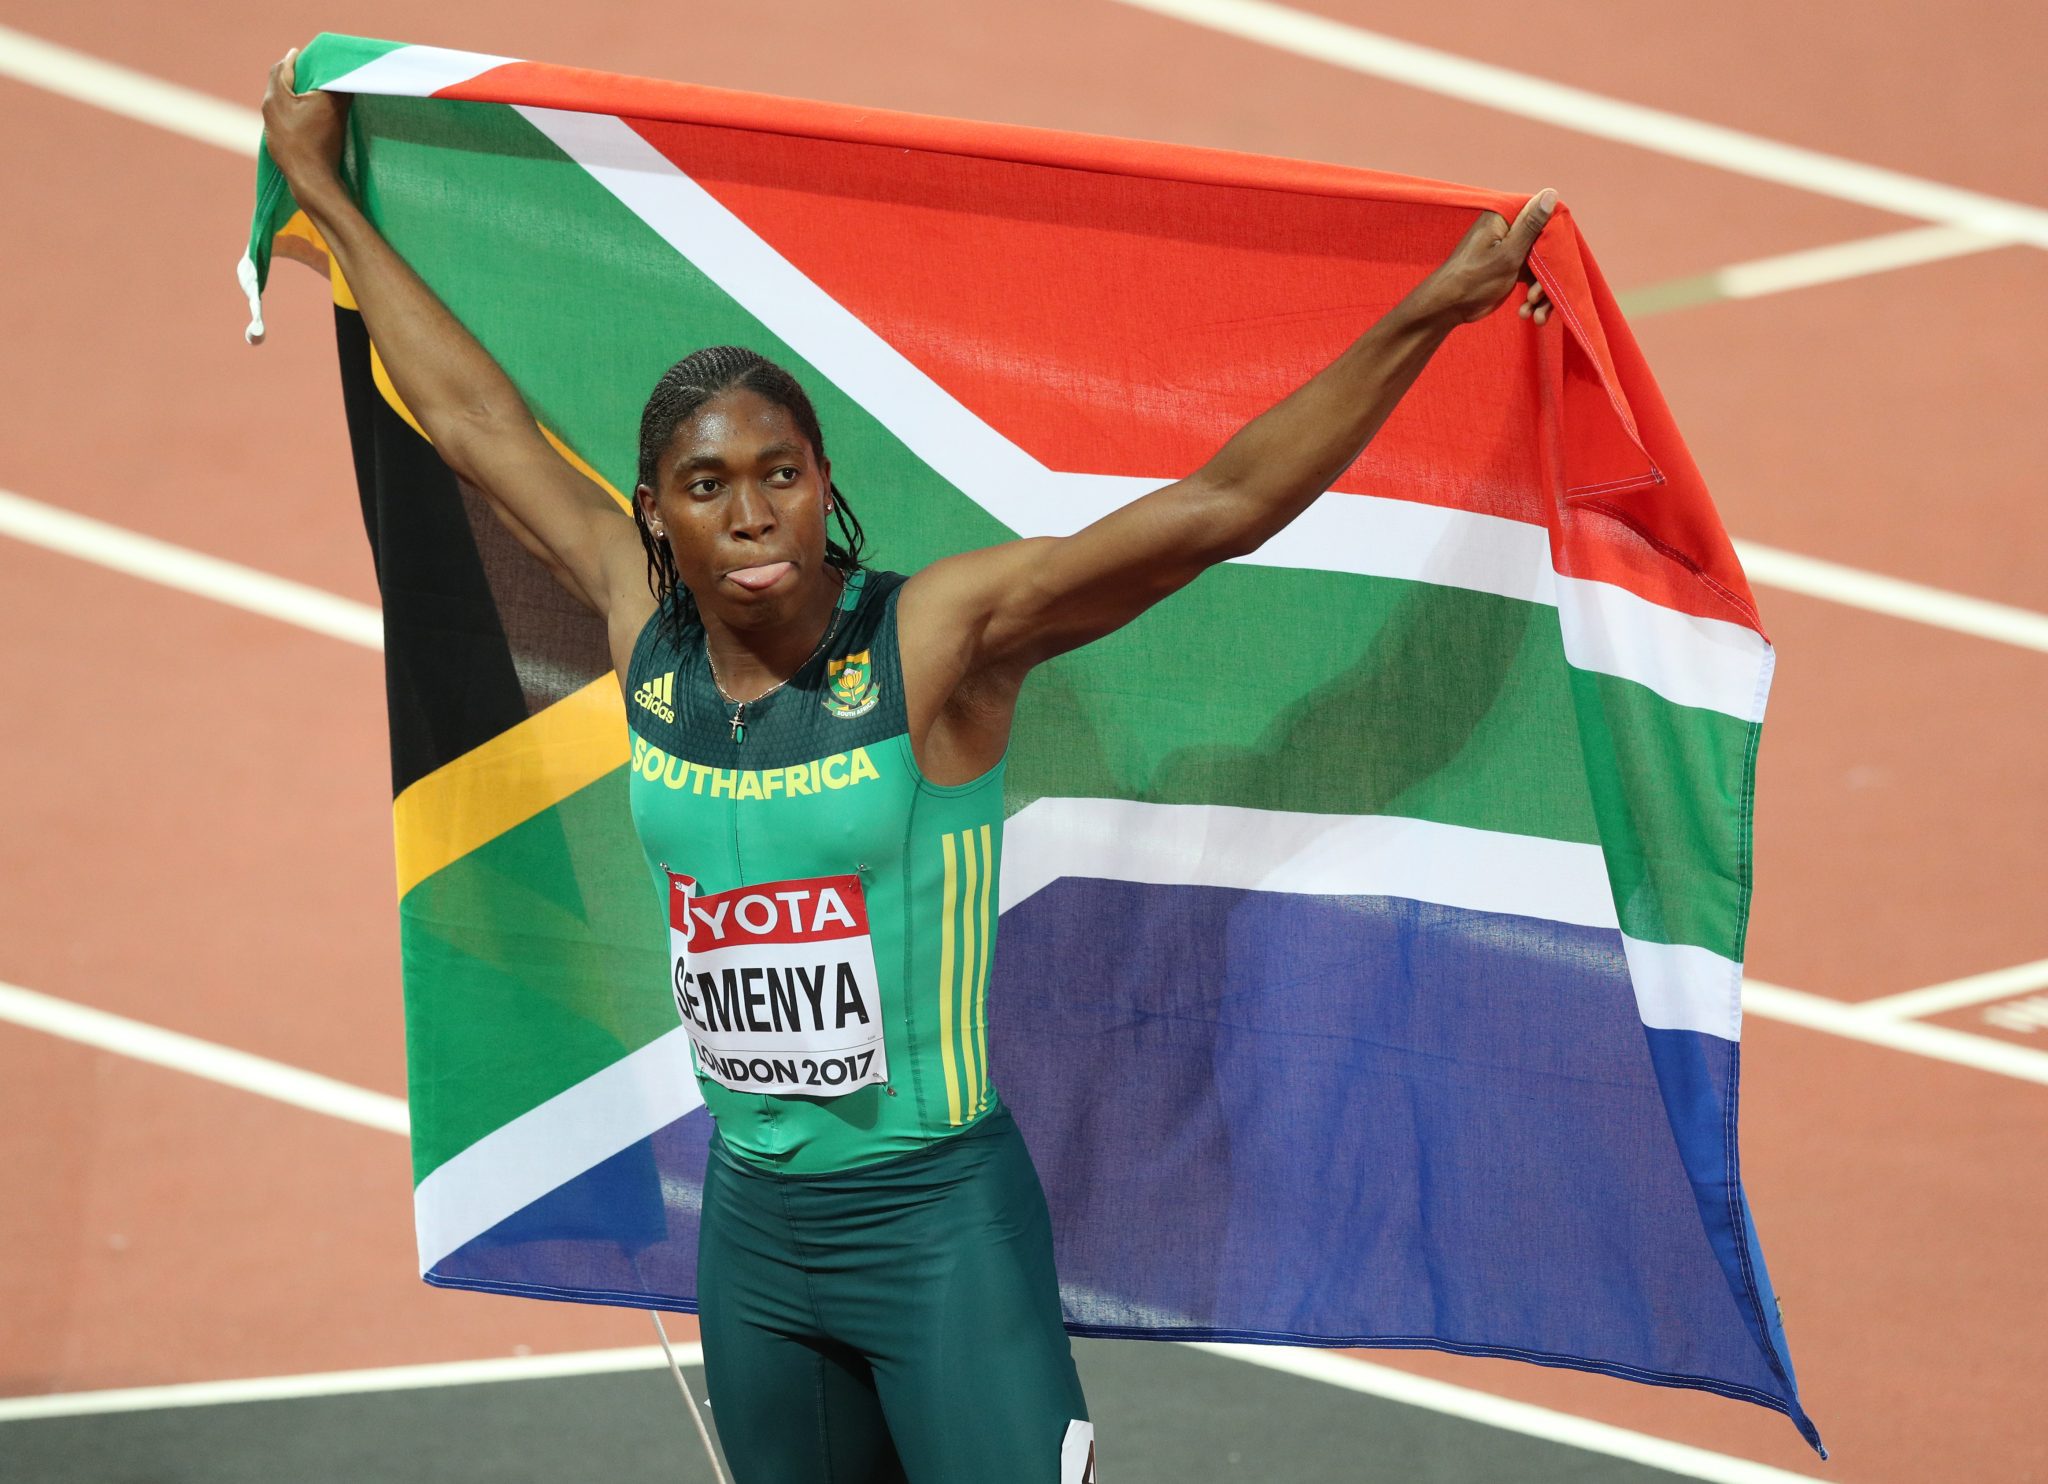 European court rules that Caster Semenya’s human rights were violated